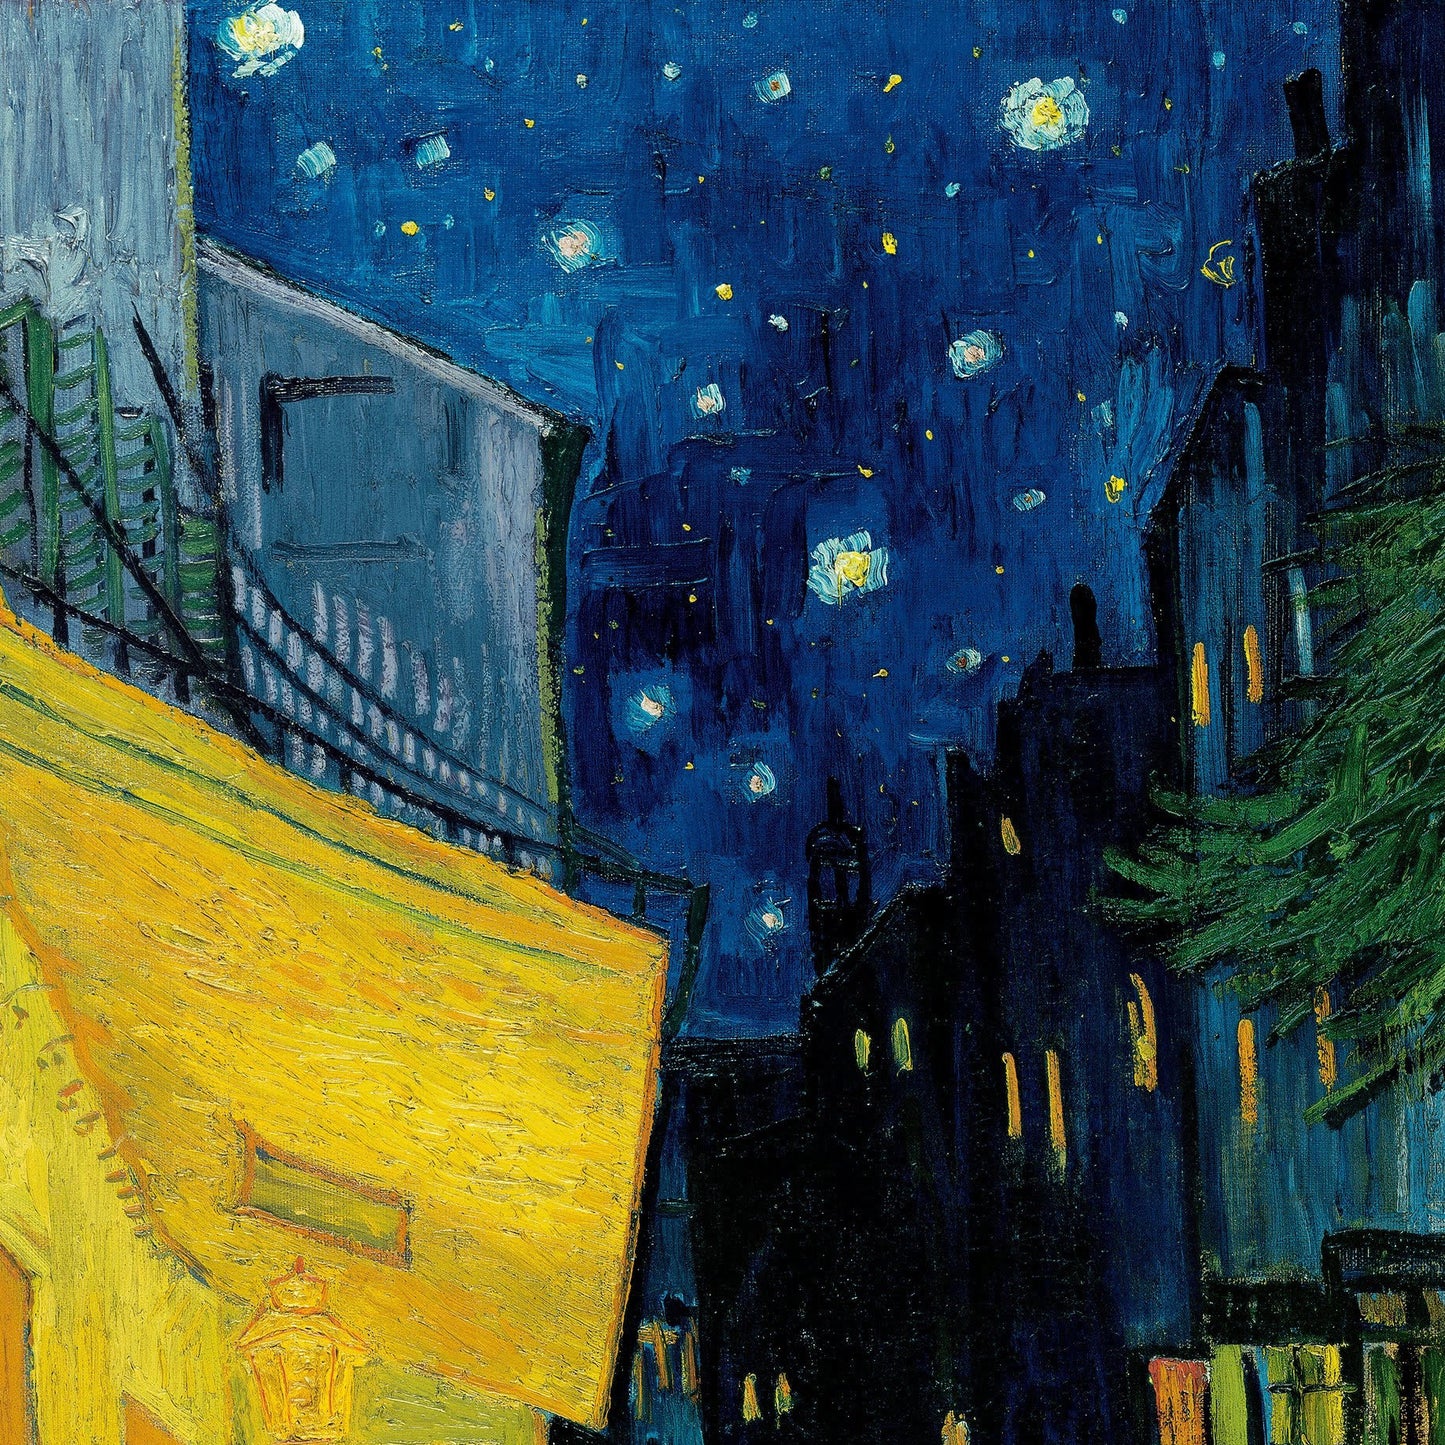 Terrace of a Café at Night by Vincent Van Gogh, 3d Printed with texture and brush strokes looks like original oil-painting, code:065